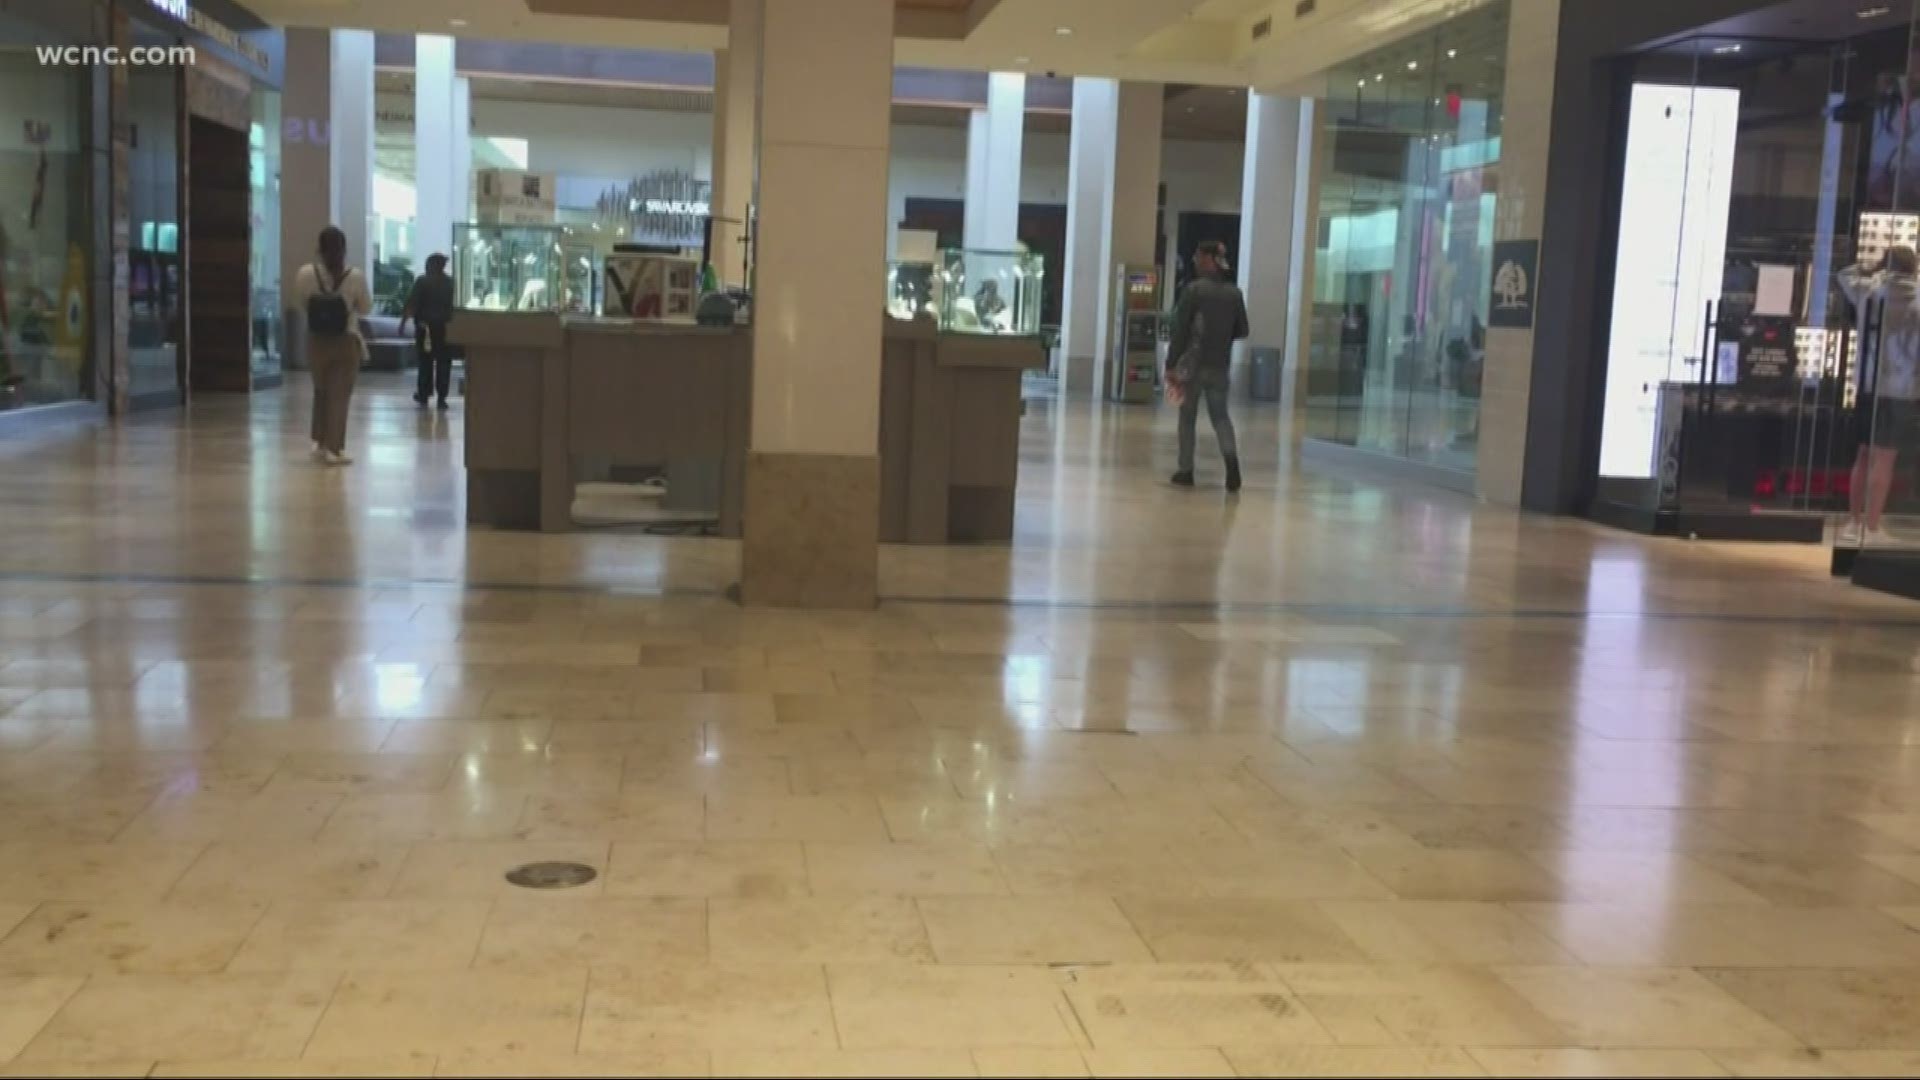 Even though several stores have announced closures during COVID-19, many malls are still operating — some on limited hours.